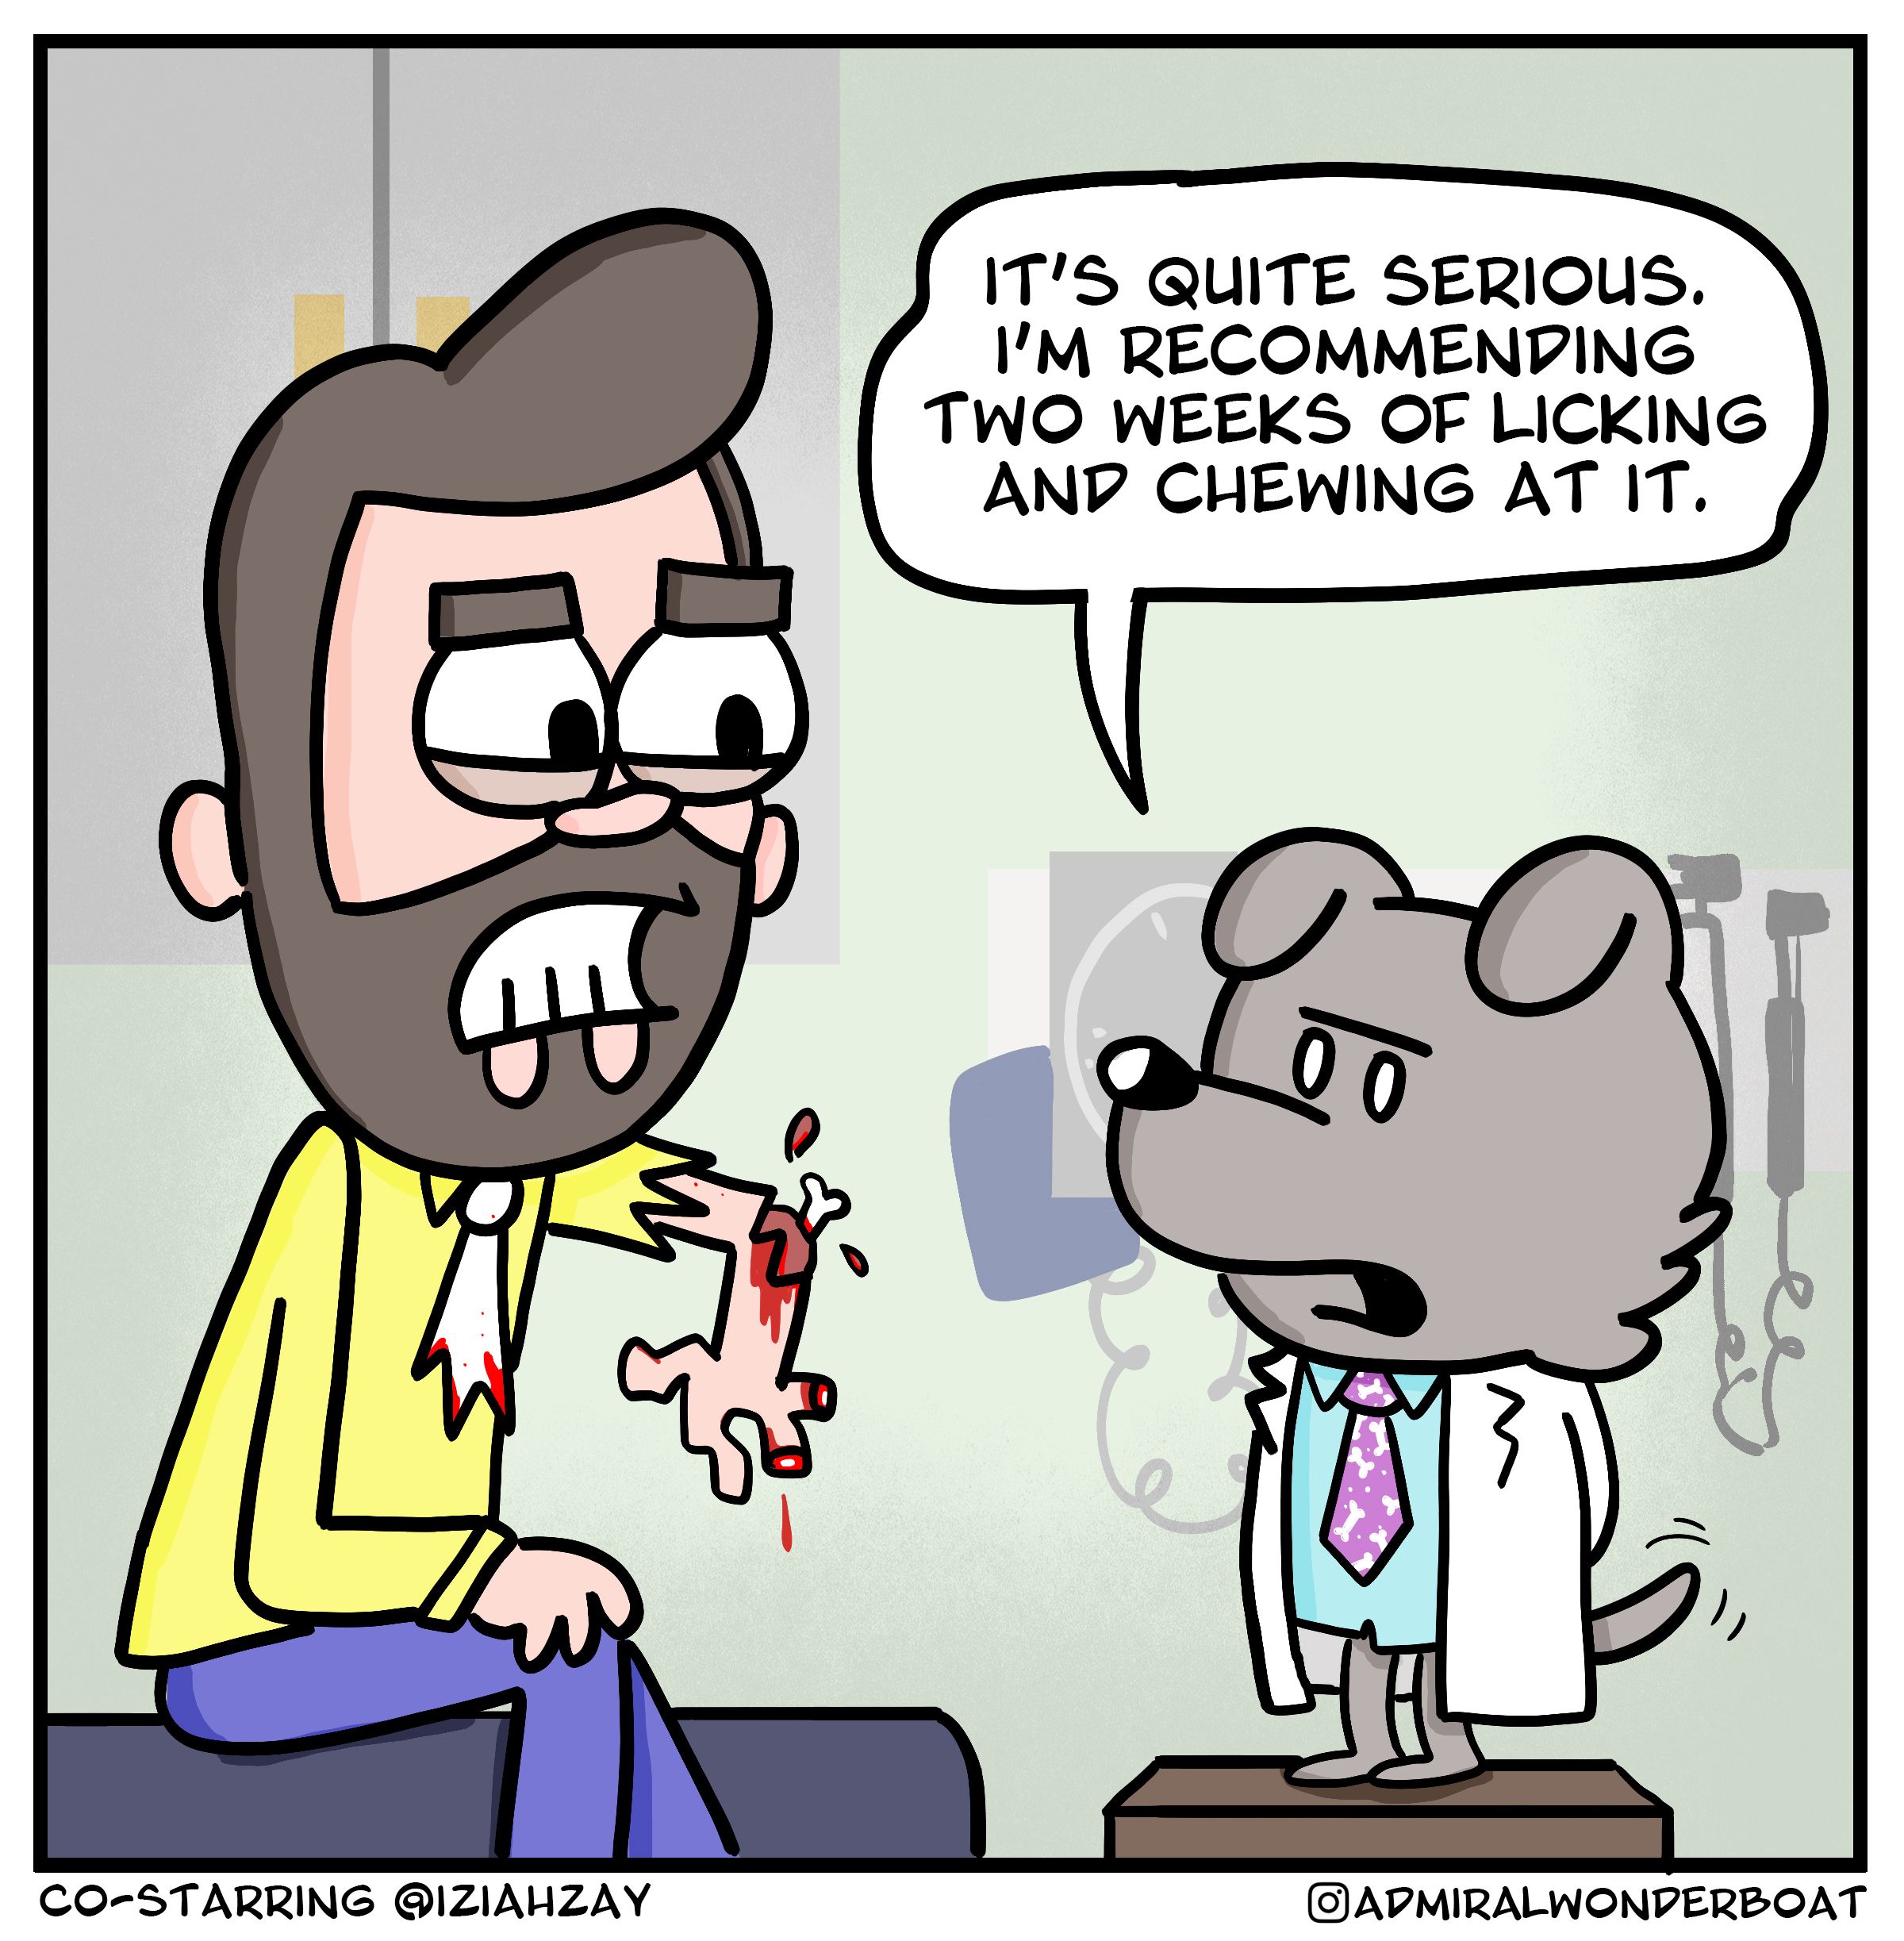 who's a good doctor? you are! yes, you are!